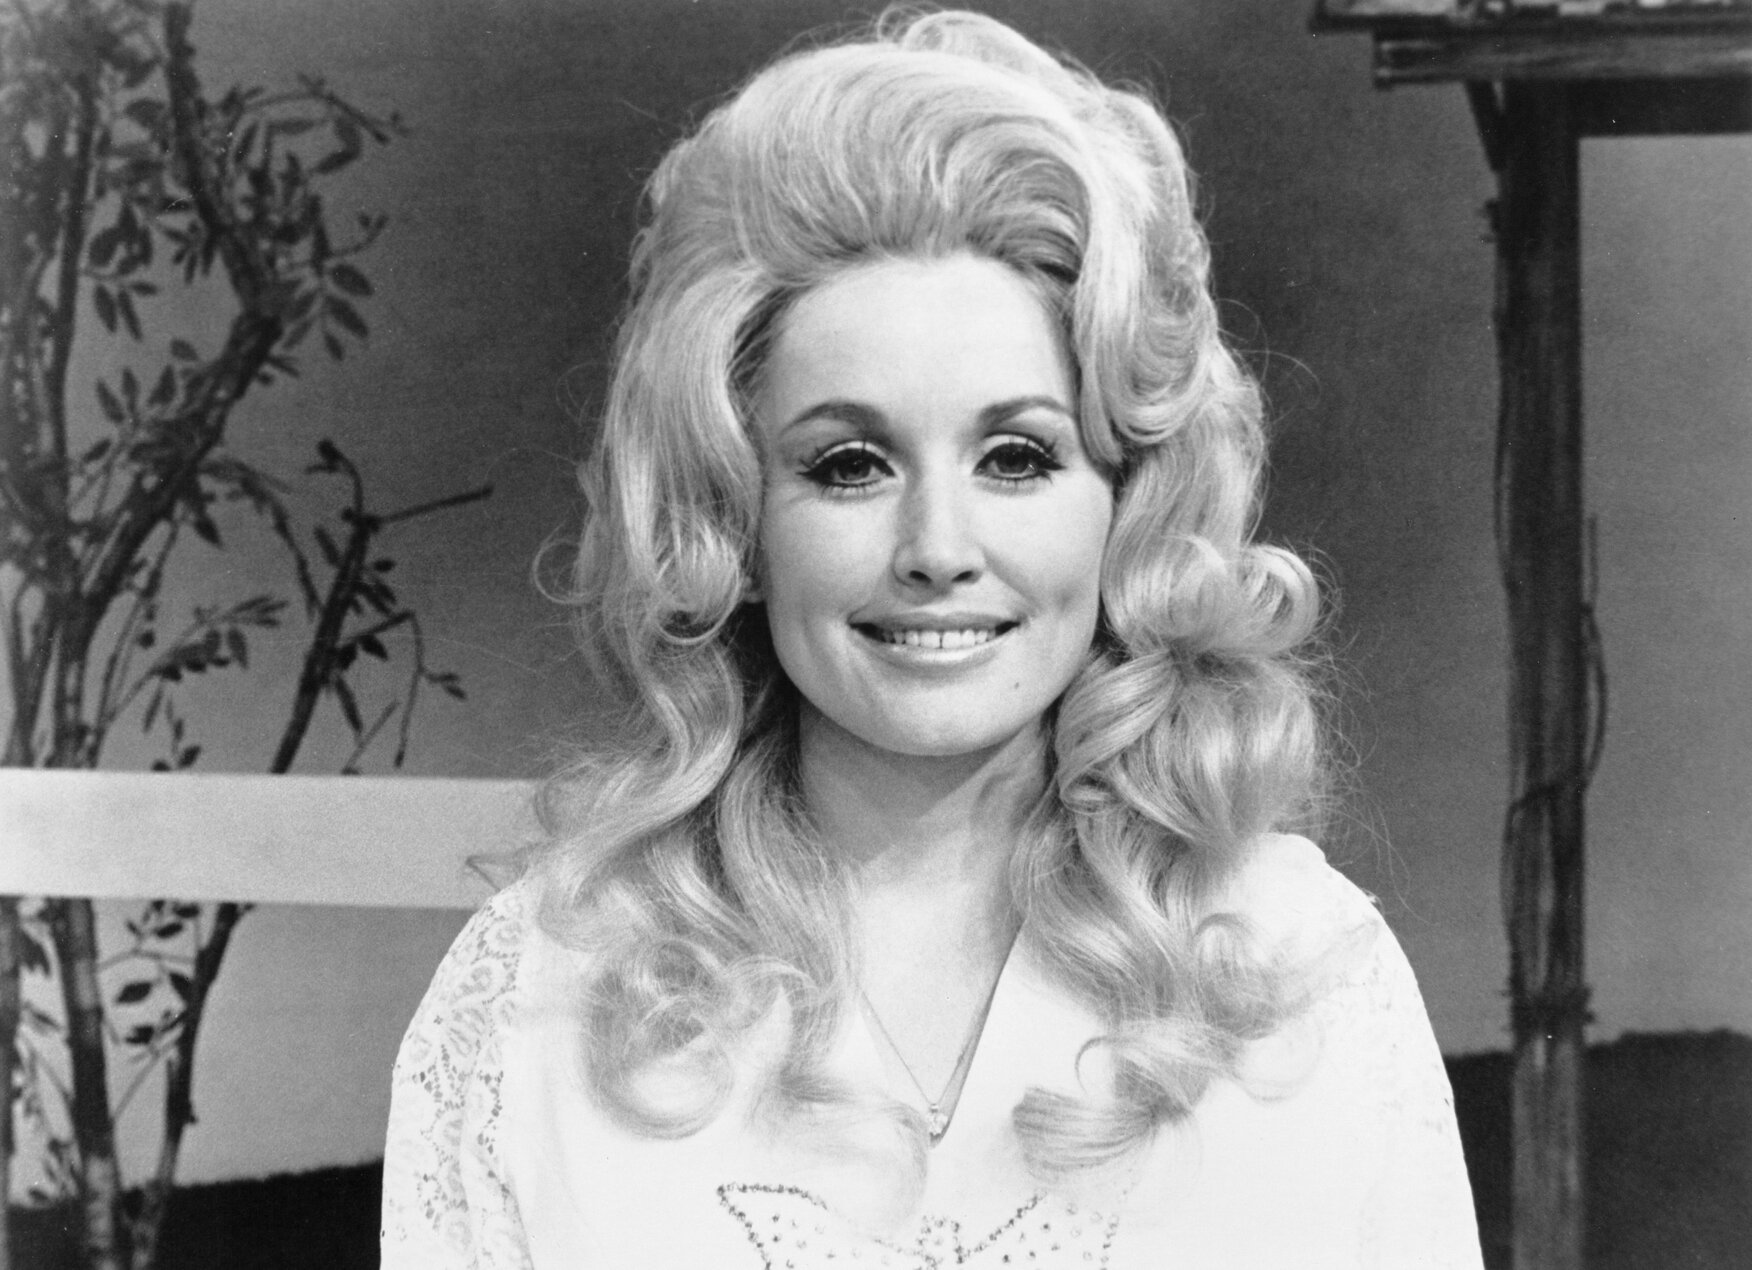 Dolly Parton photographed in black and white in 1972.